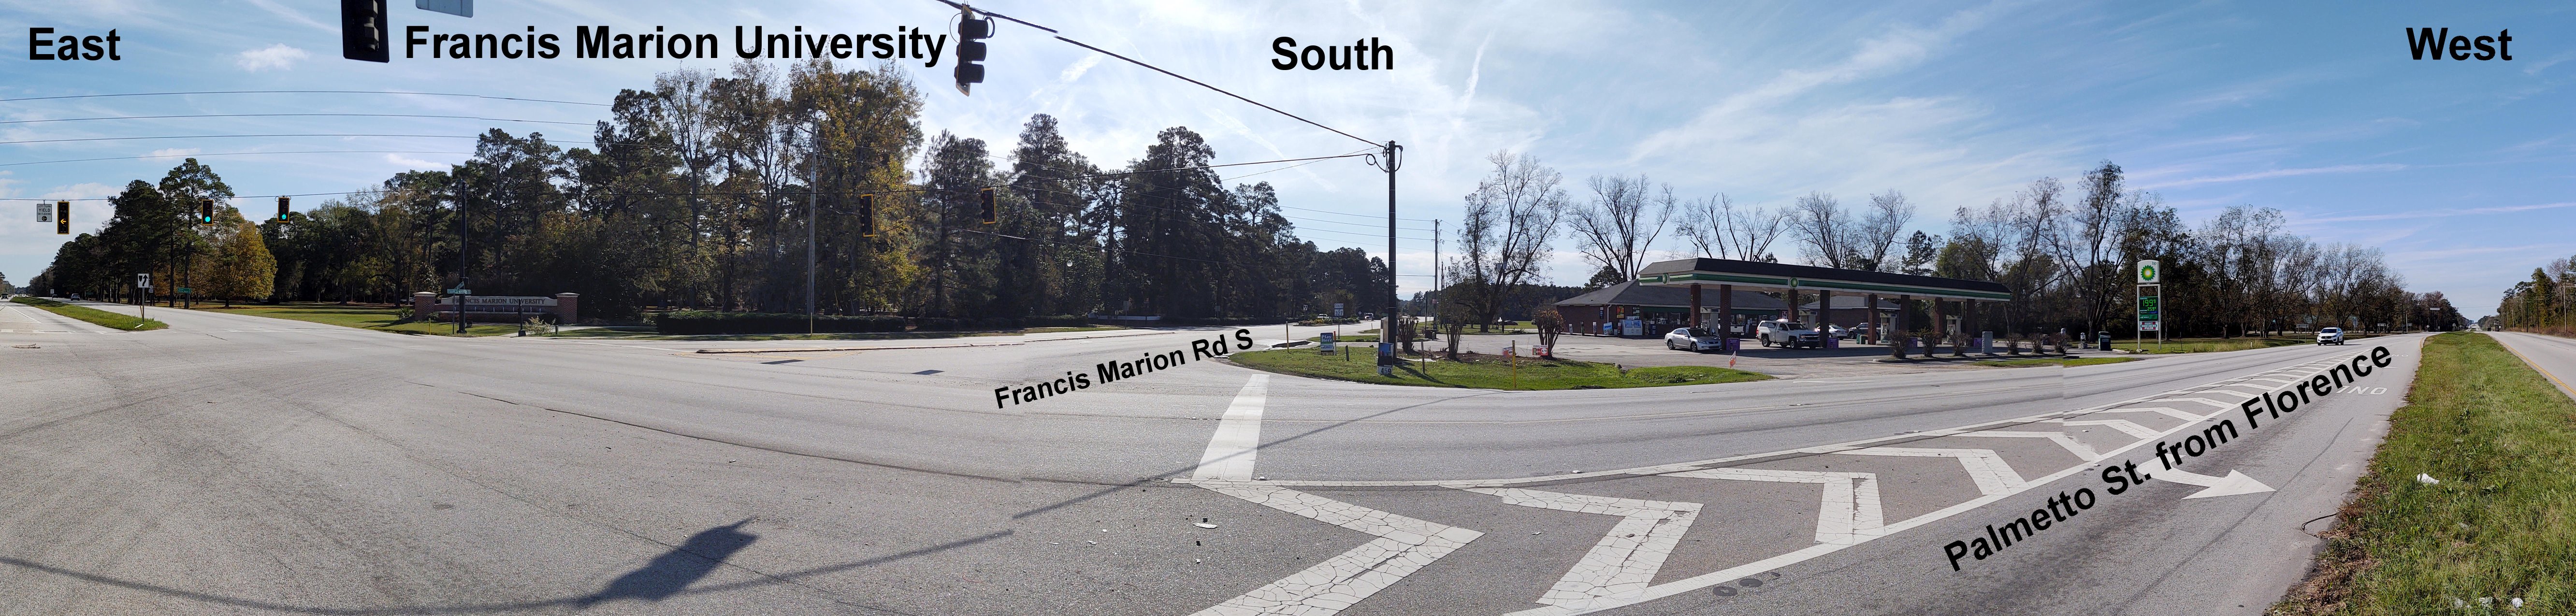 South Panorama from Intersection